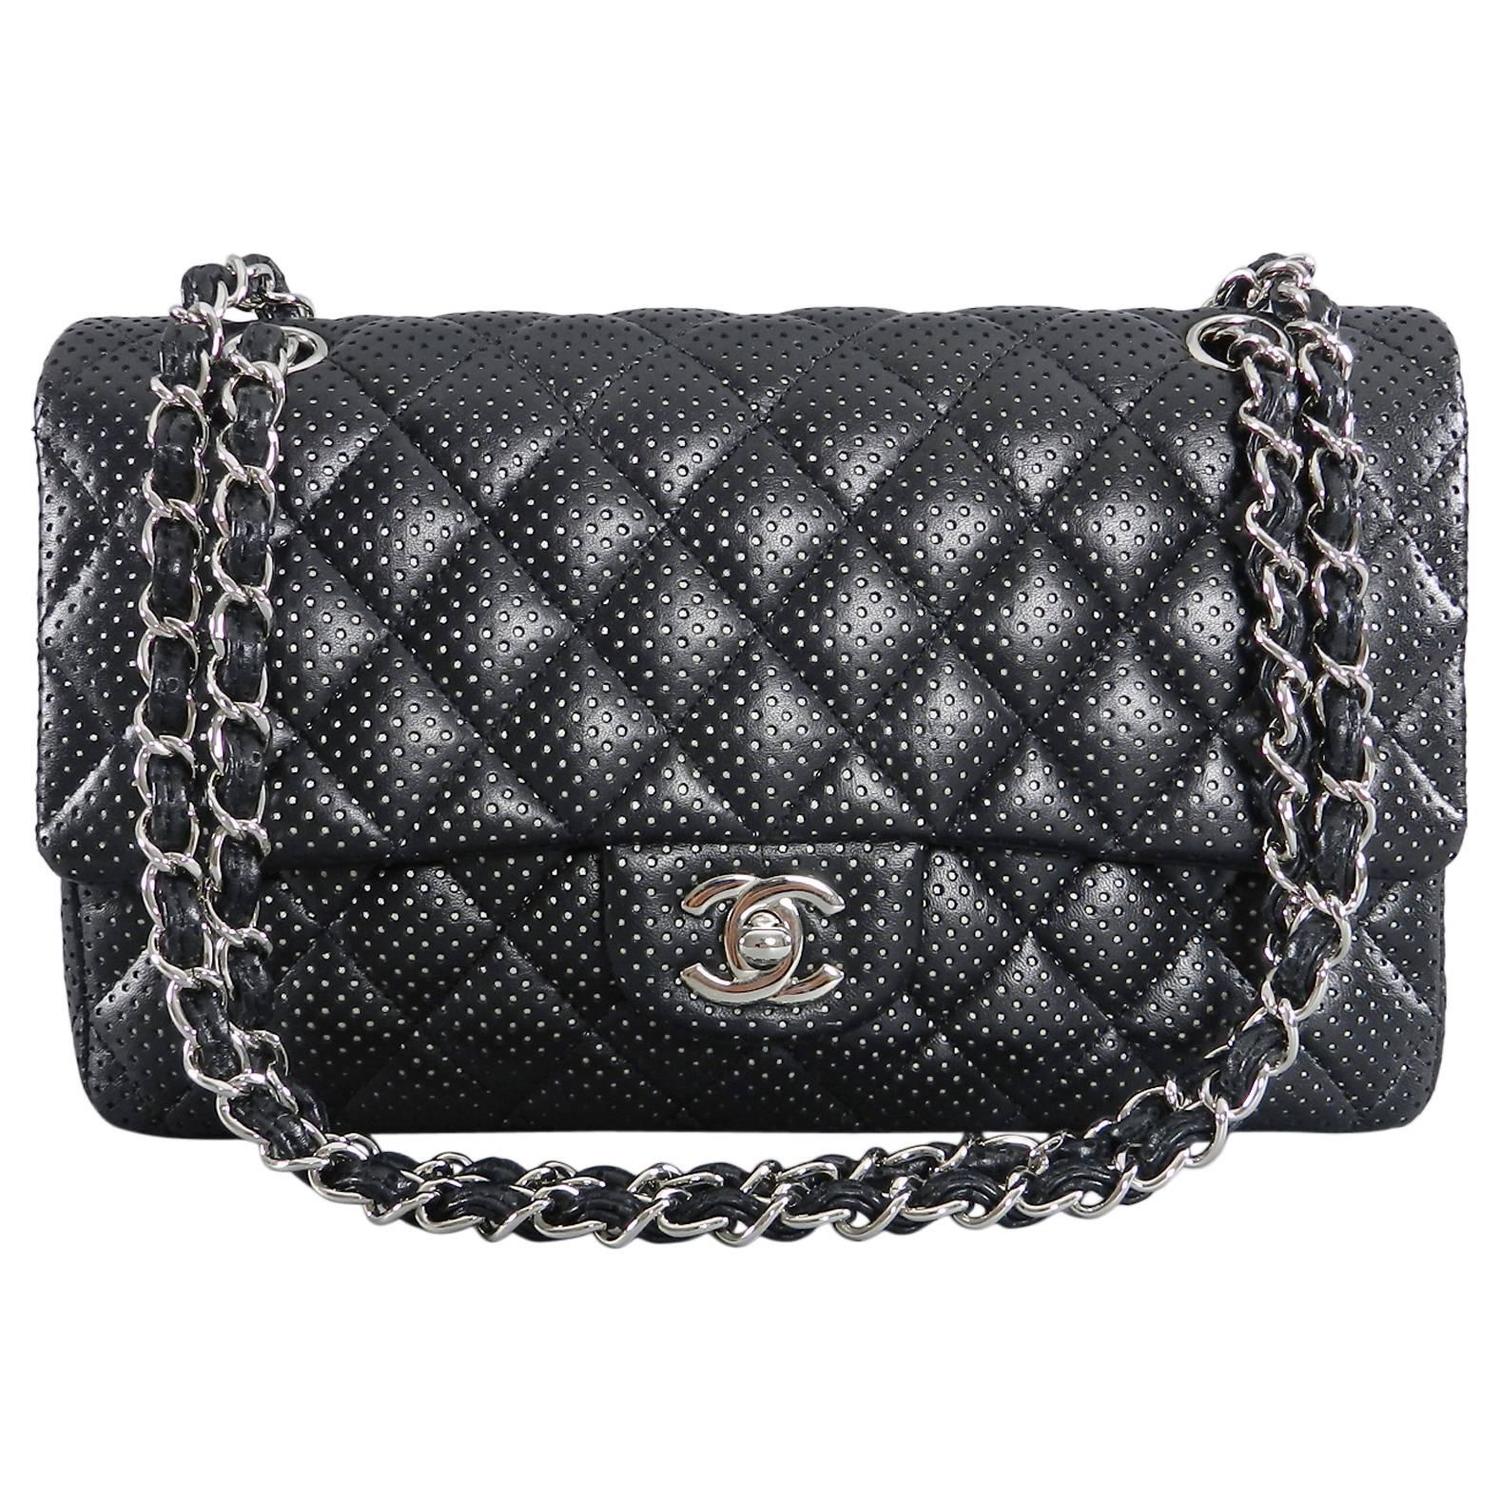 CHANEL Black Perforated Classic Flap Bag Purse Medium Silver Hardware at 1stdibs